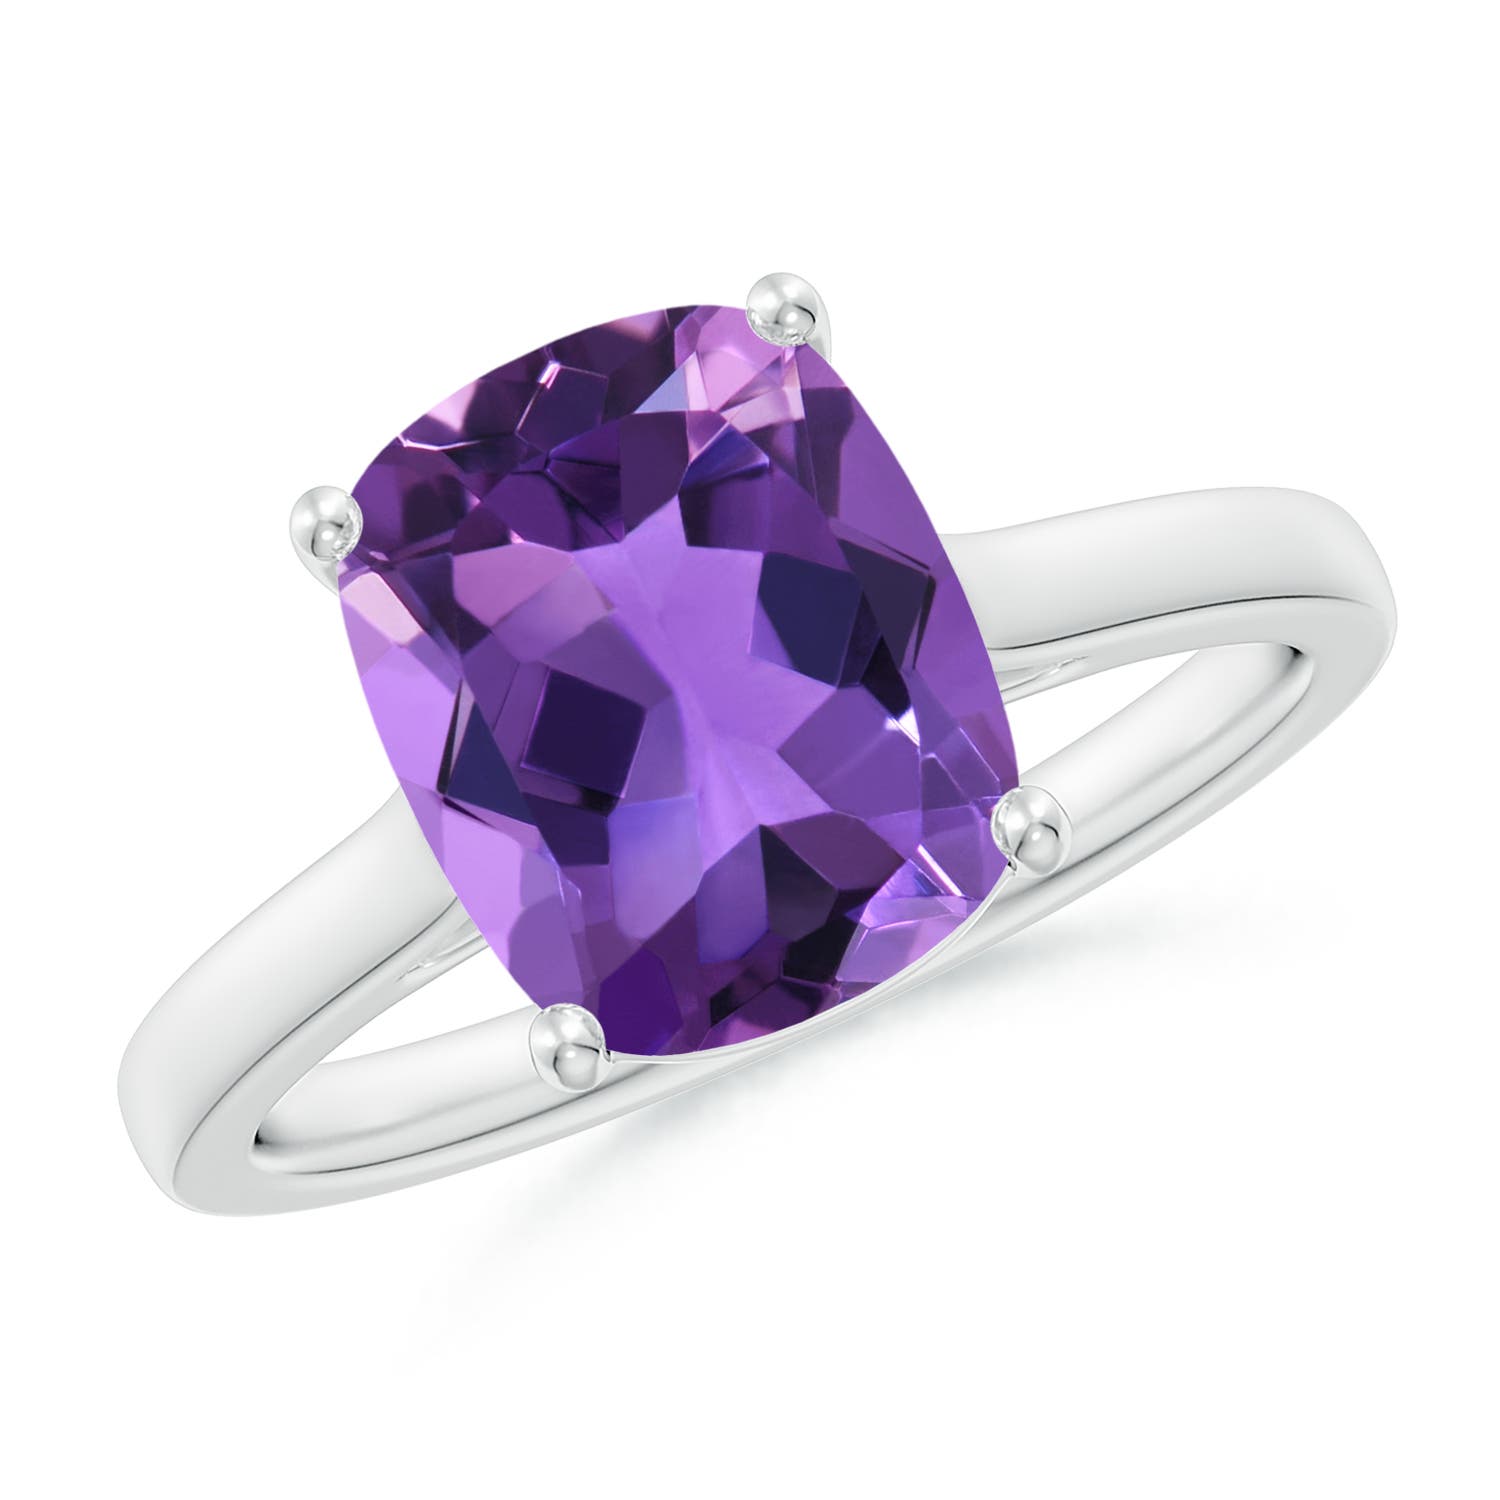 AAA - Amethyst / 2.72 CT / 14 KT White Gold